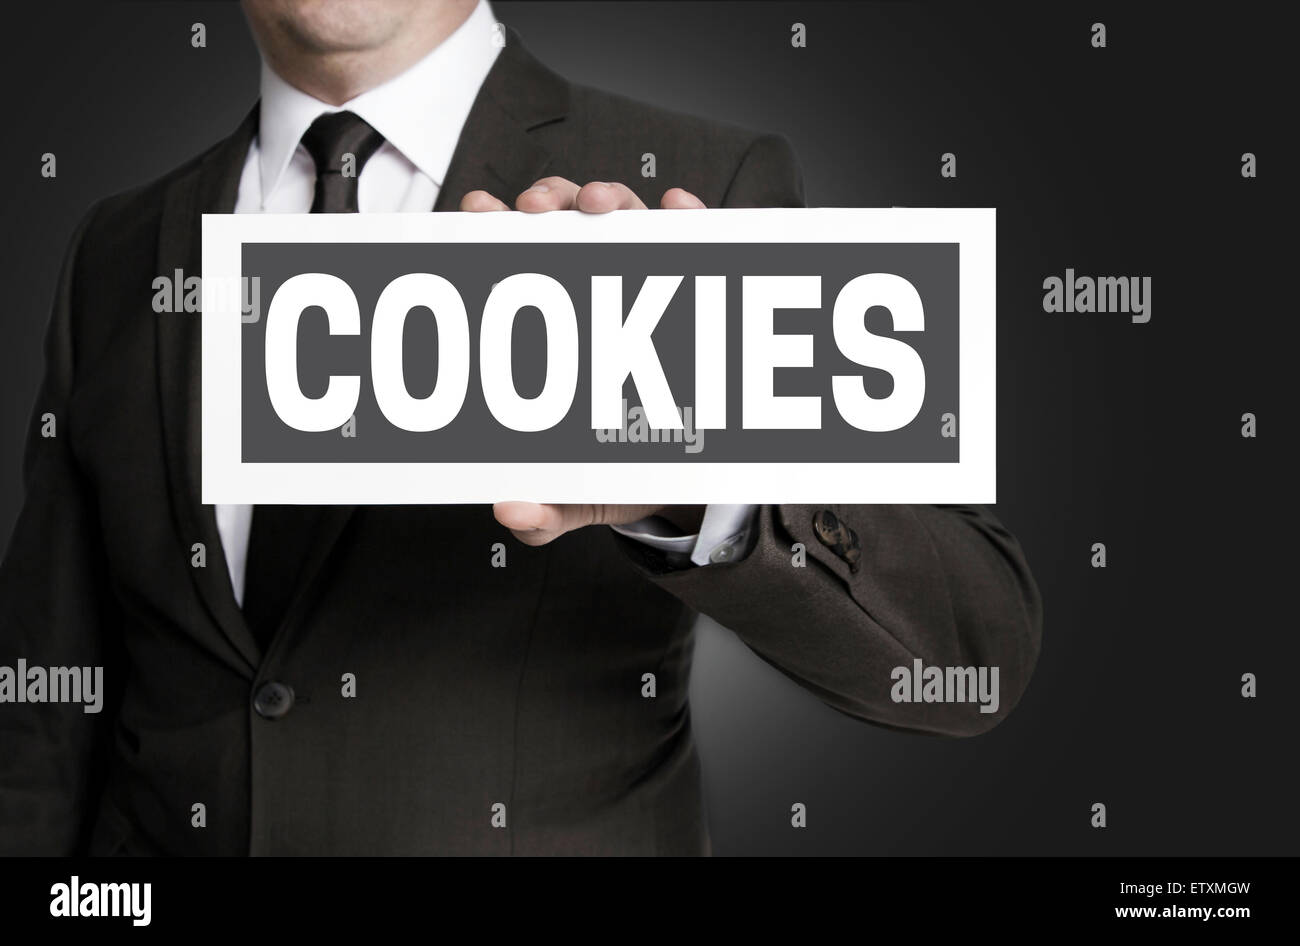 Cookies plate is held by businessman. Stock Photo